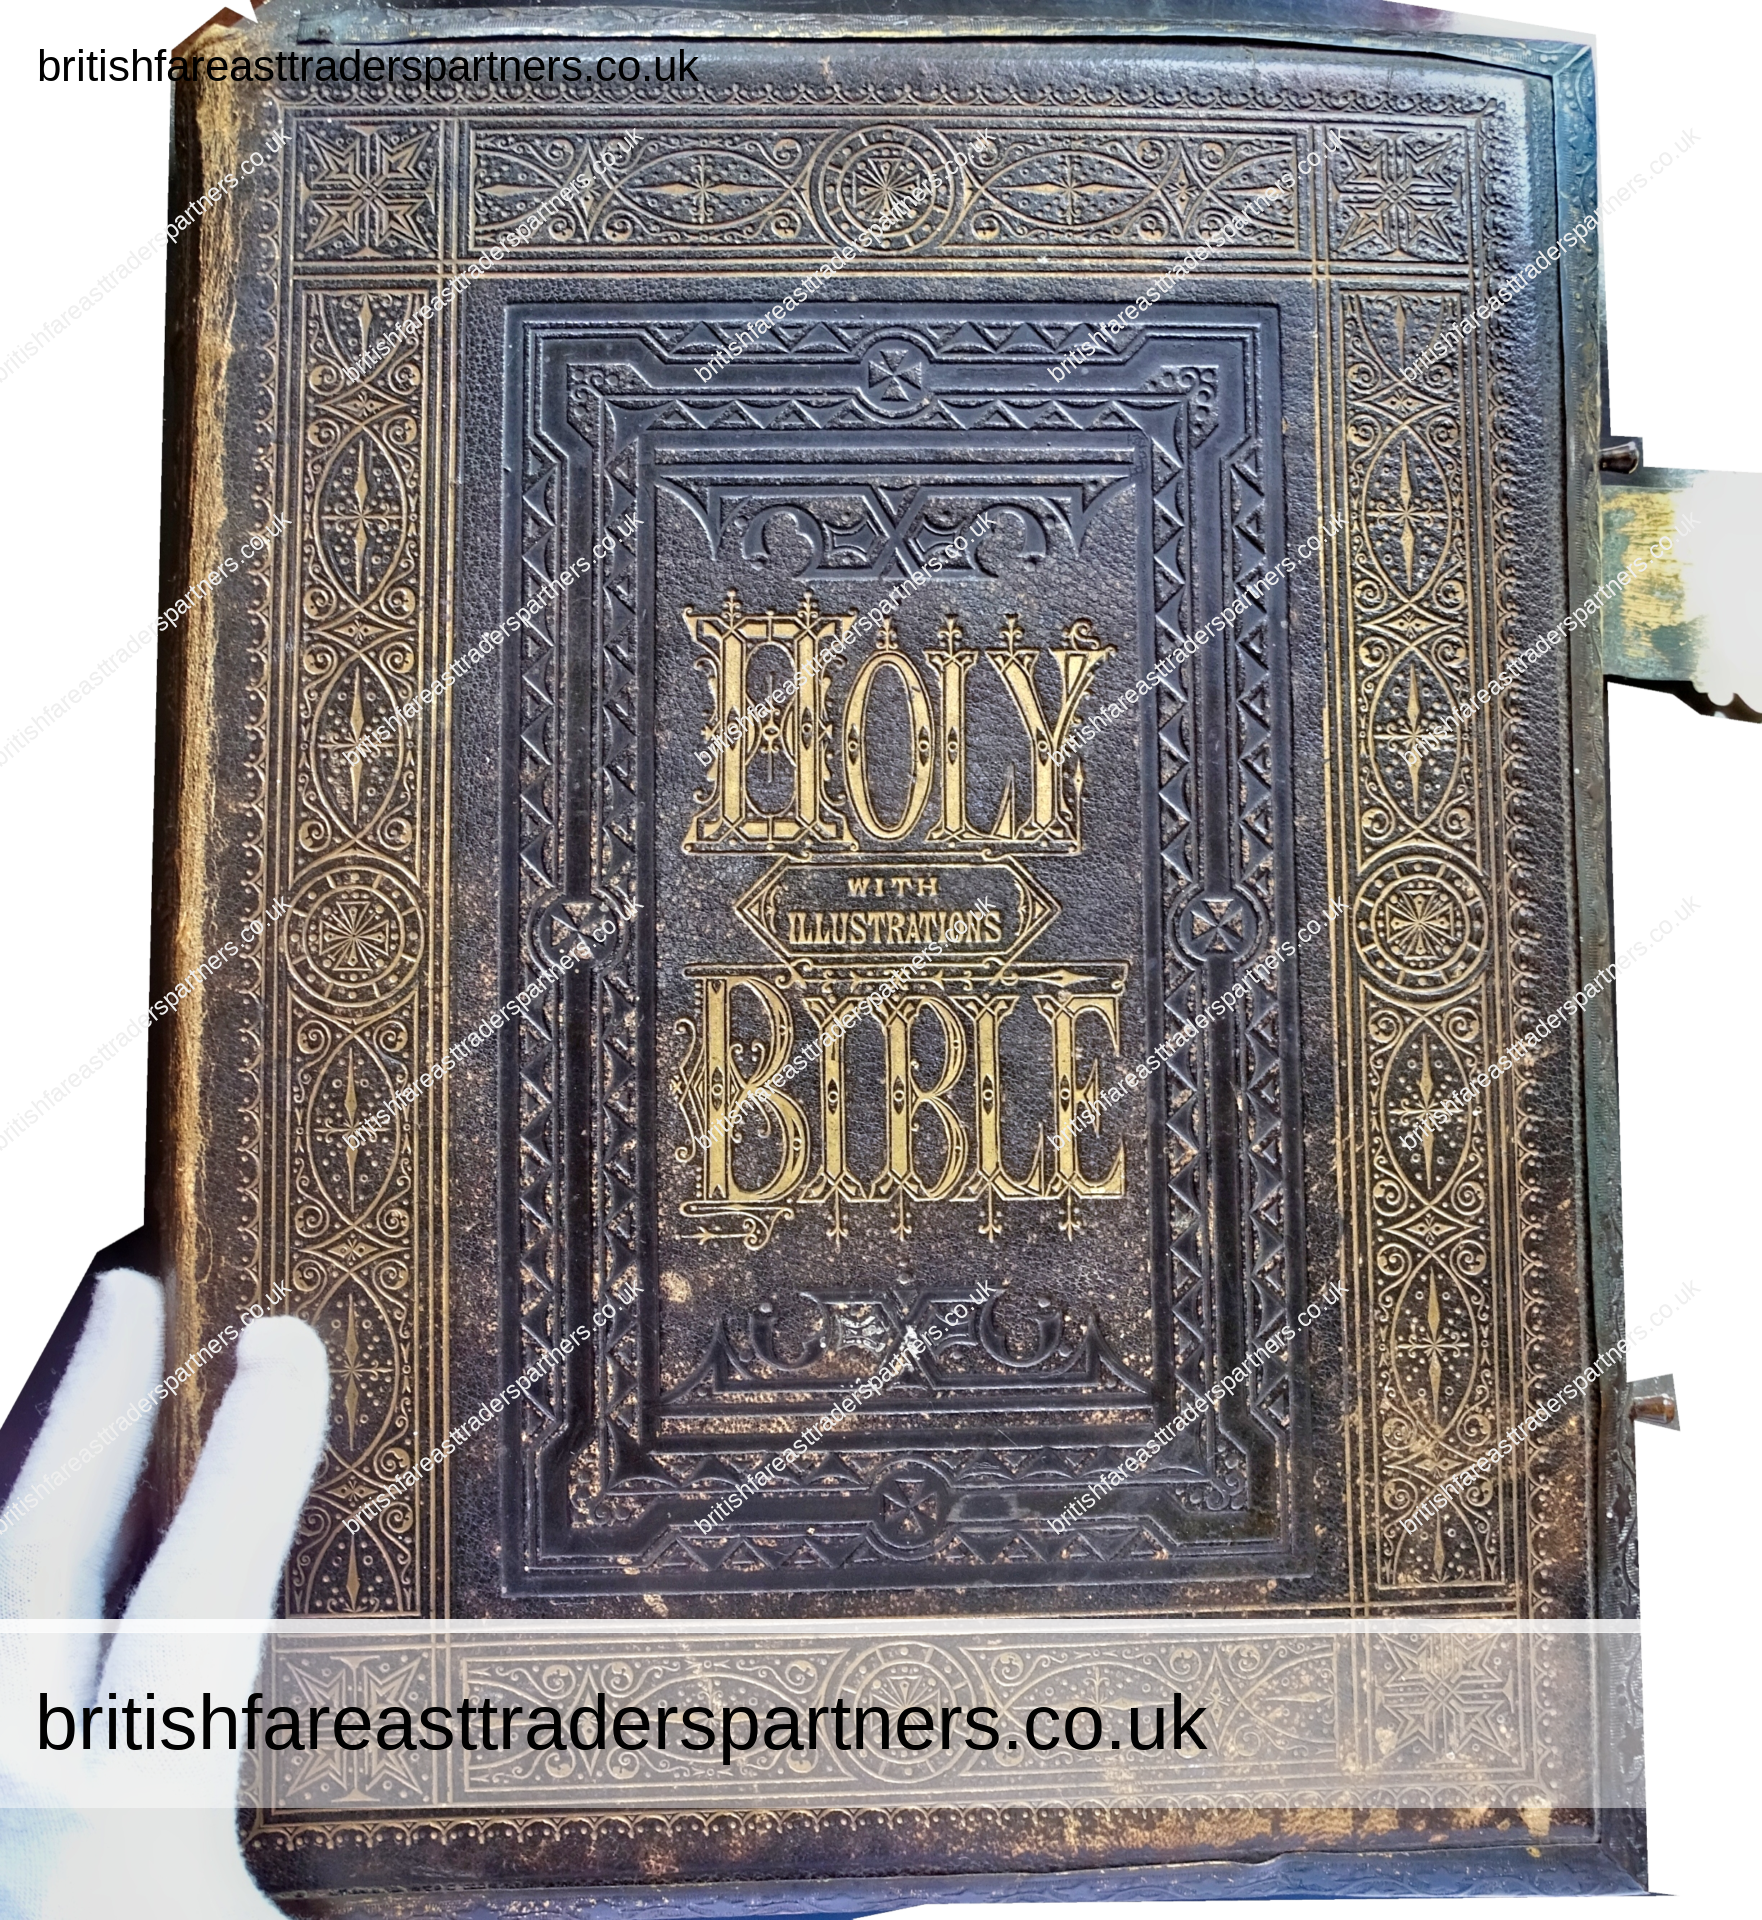 ANTIQUE VICTORIAN HOLY BIBLE BY THE LATE REV. JOHN BROWN J.G. MURDOCH (HOLBORN , LONDON) ANTIQUES | ENGLAND | BOOKS | BIBLE UNITED KINGDOM | RELIGION |  CHRISTIANITY | HISTORY | HERITAGE | CULTURE